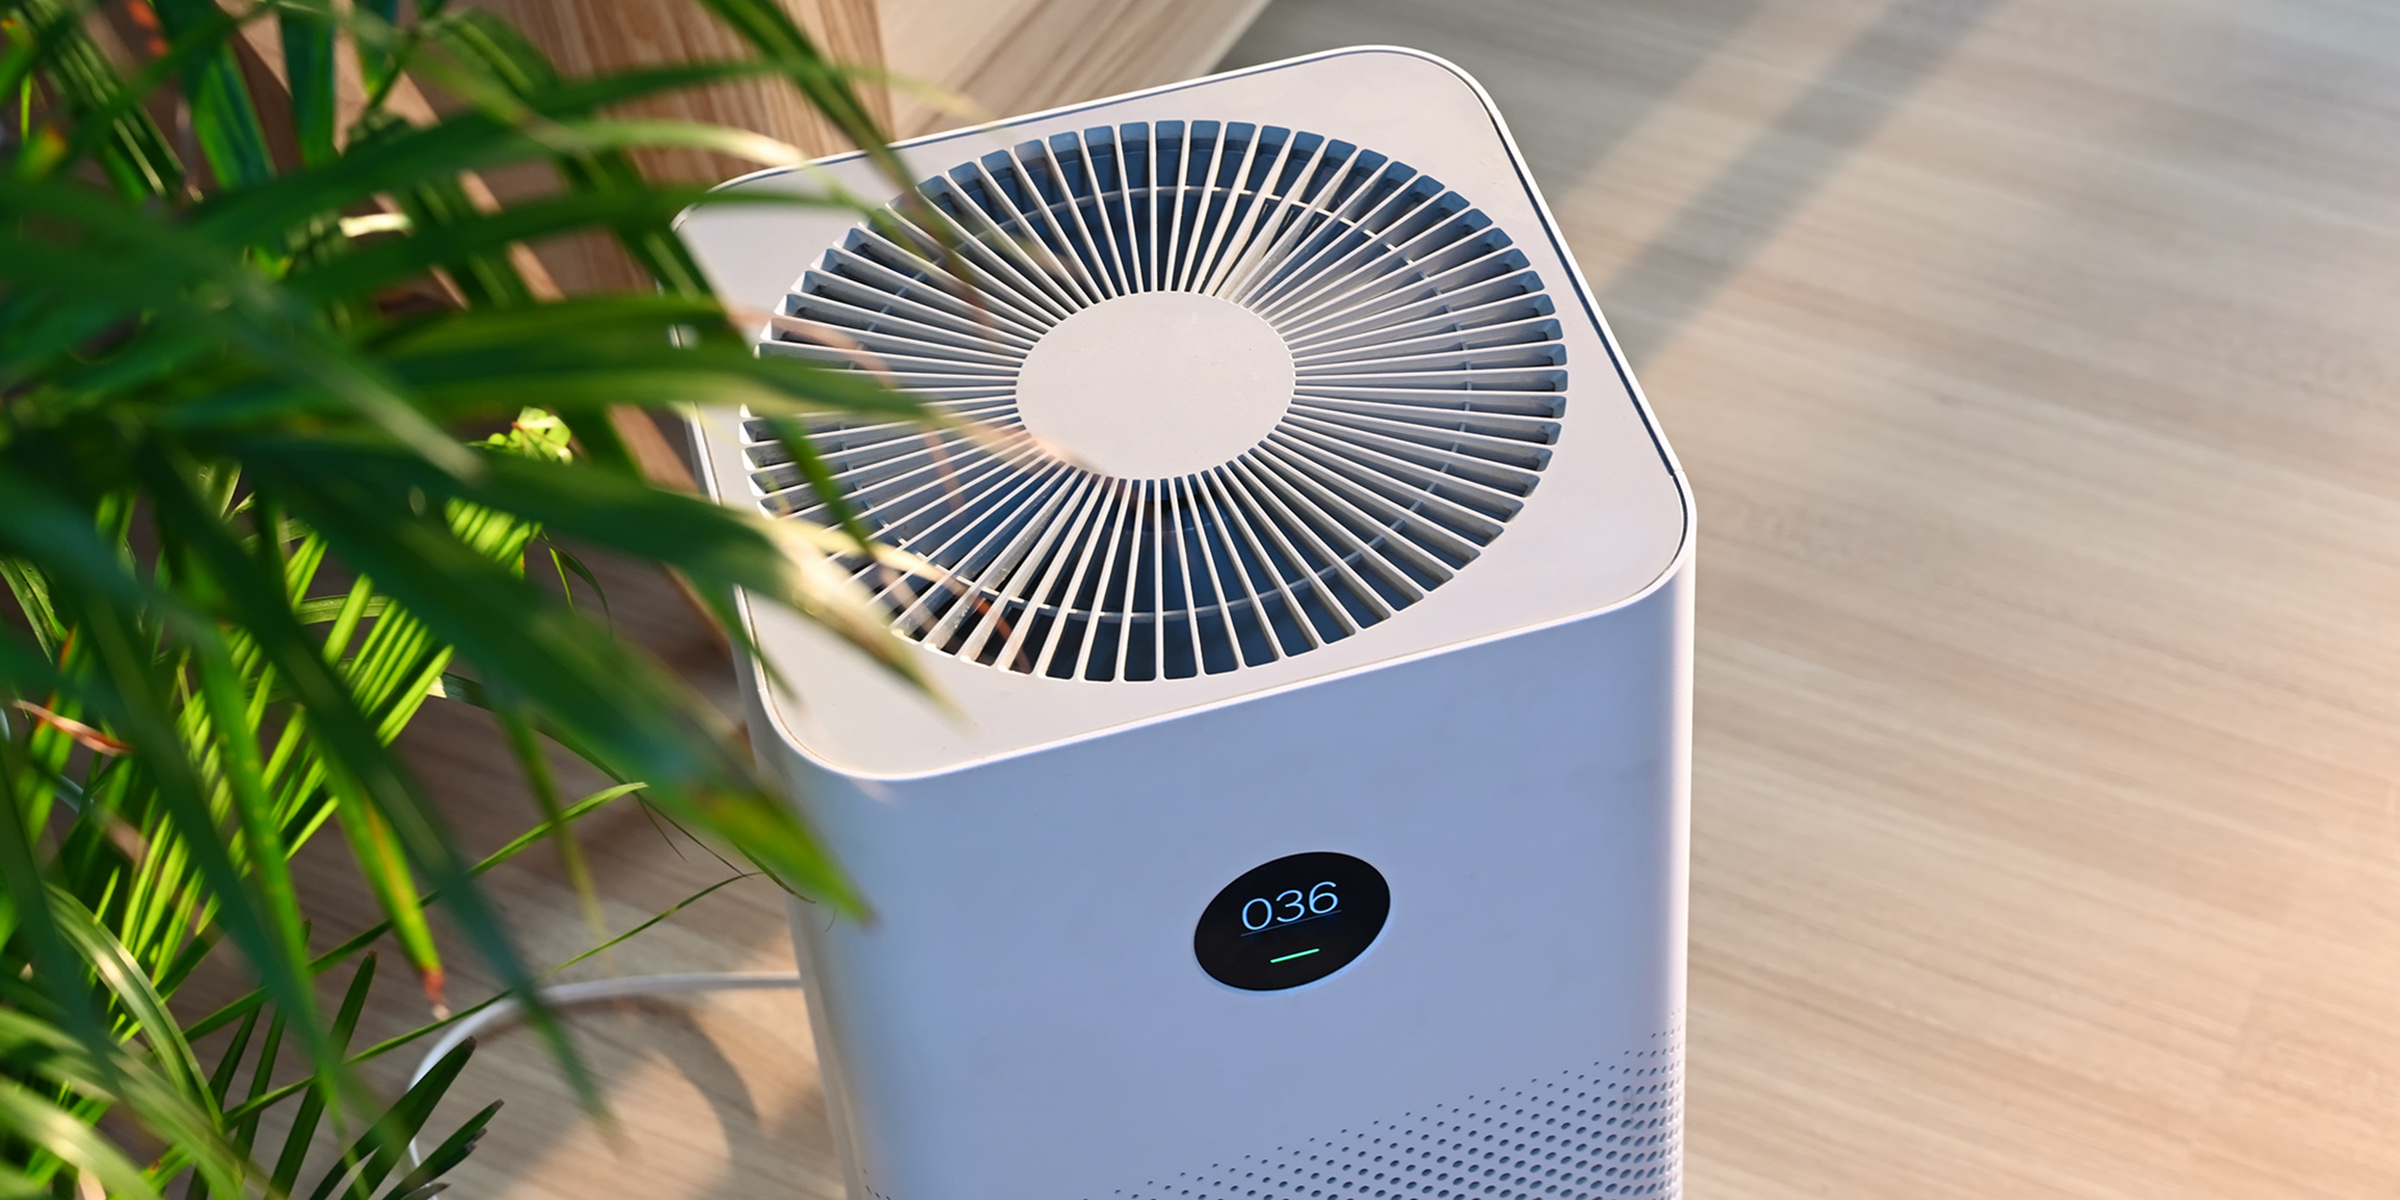 Air Purifier Market Size 2022: Global Share, Trends, Growth, Analysis, Segmentation, and Report 2027